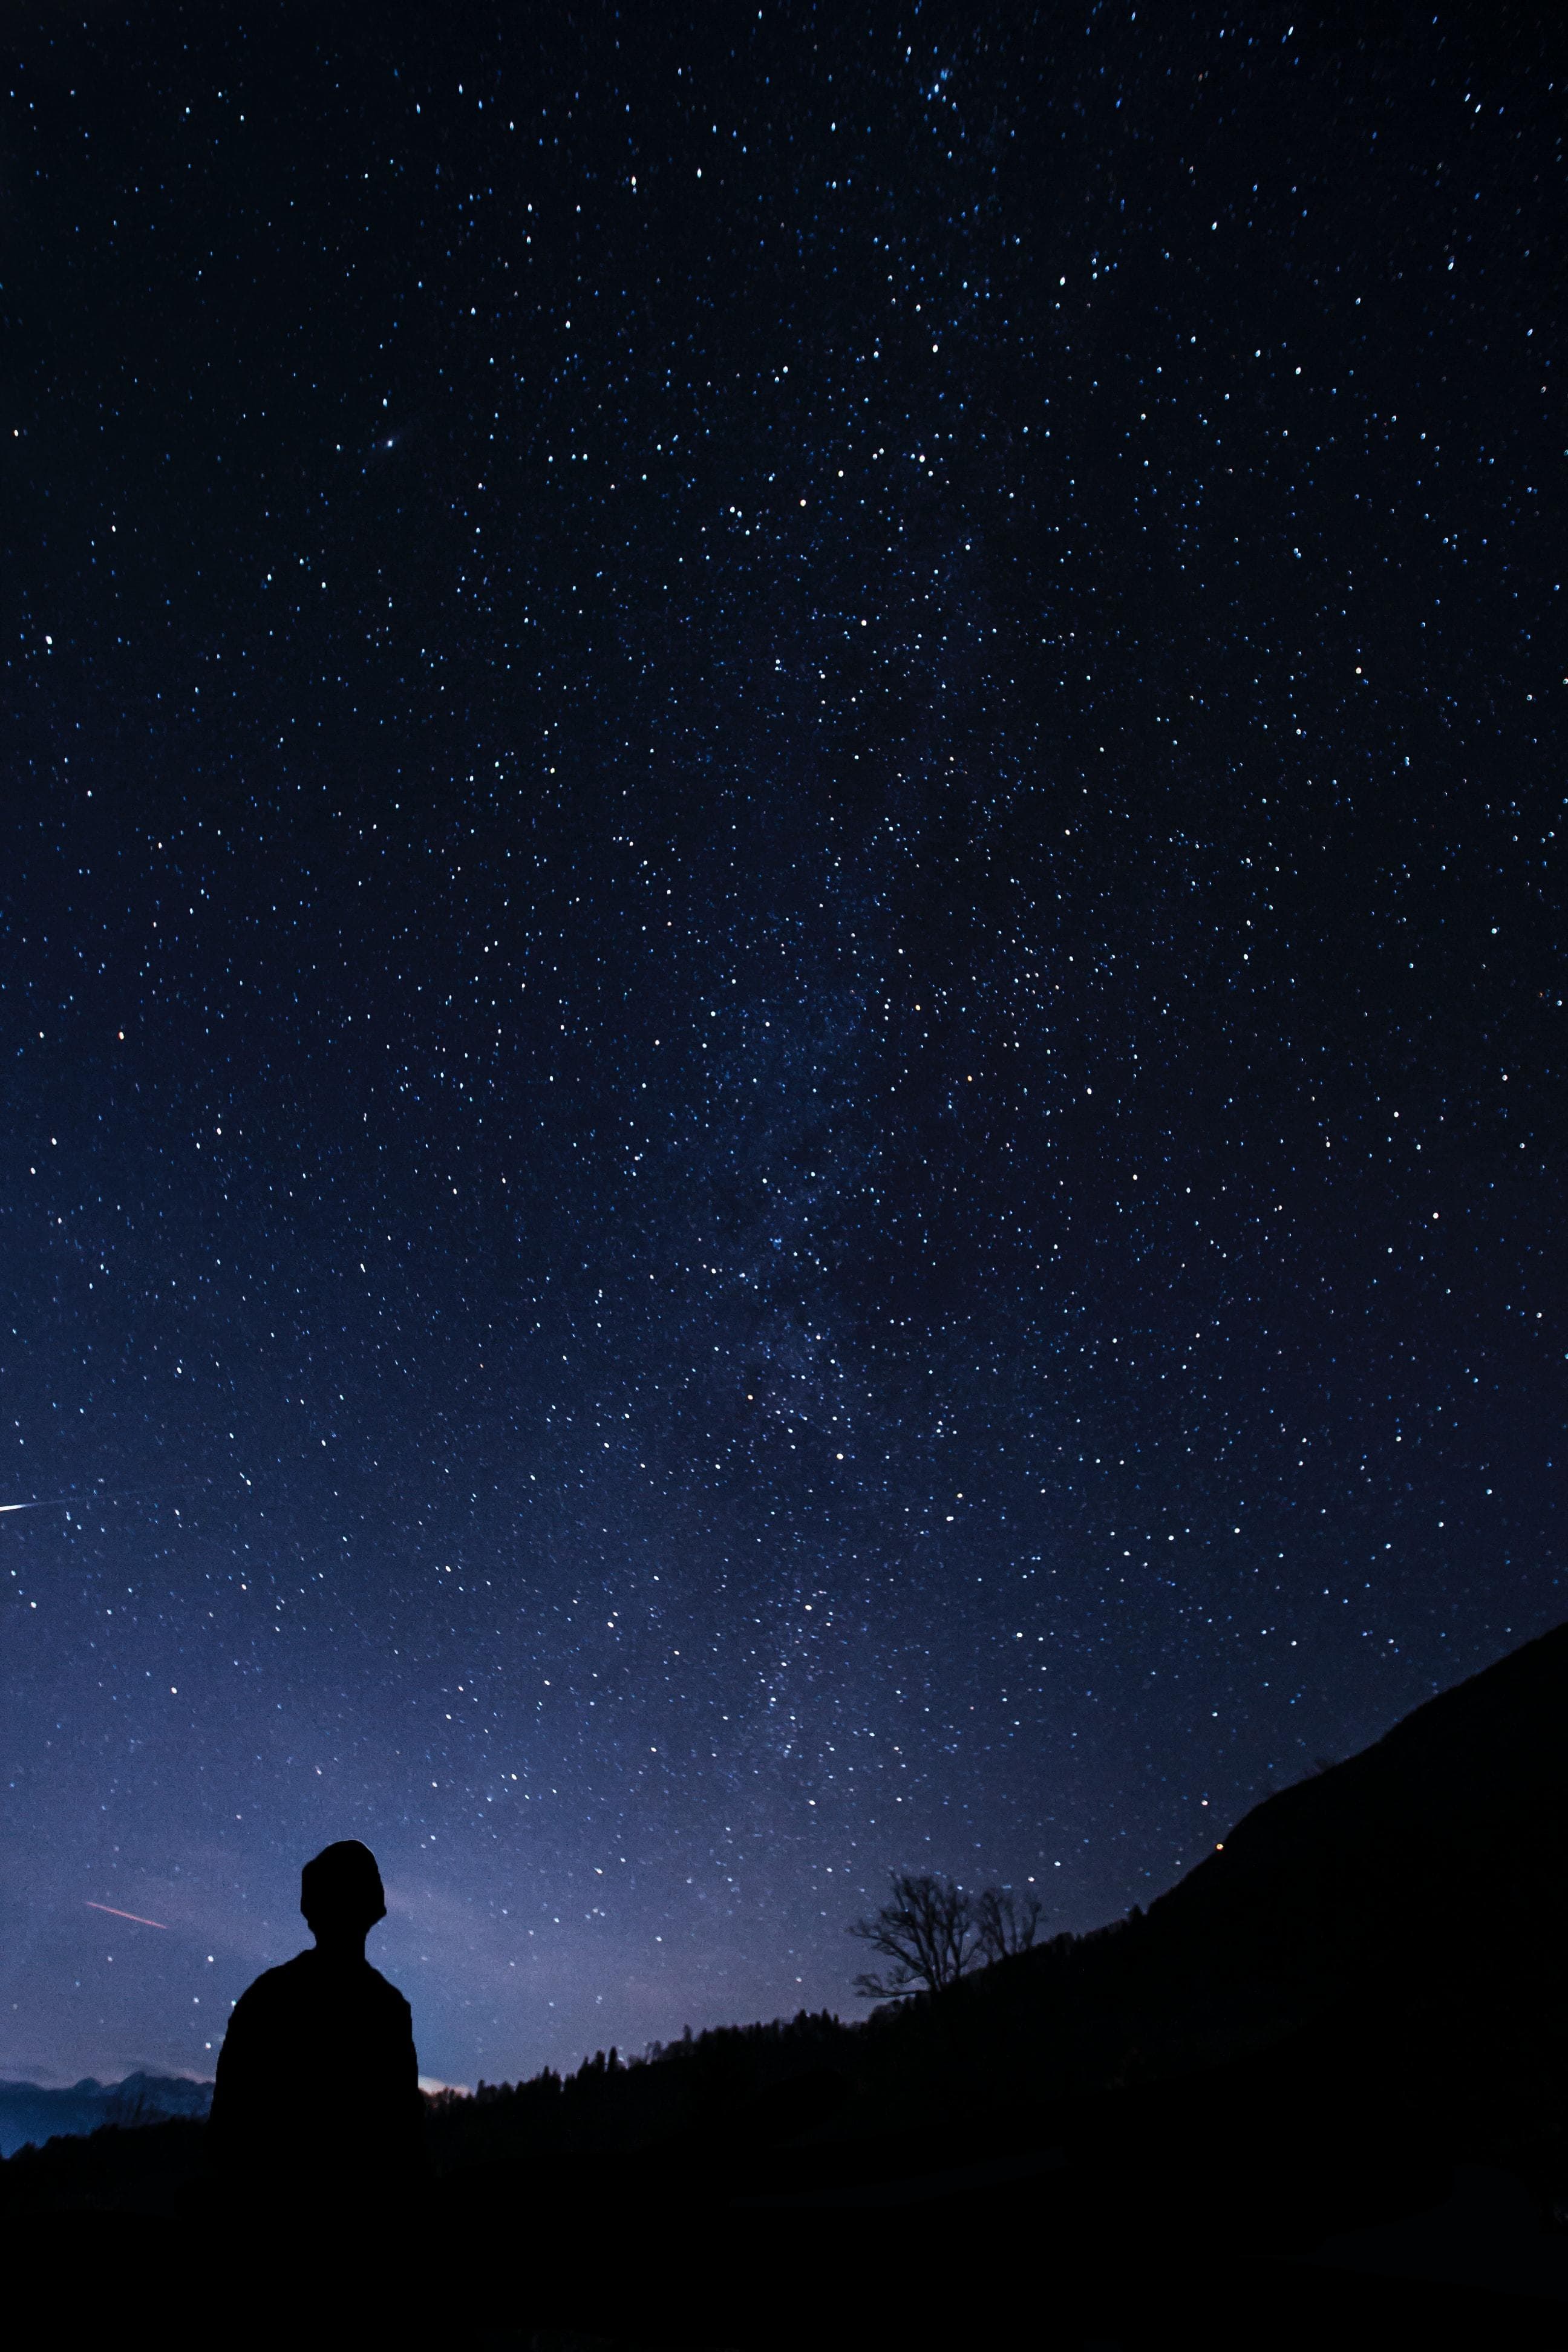 A starlight sky reveals only the silhoutte of a person looking up at the night sky